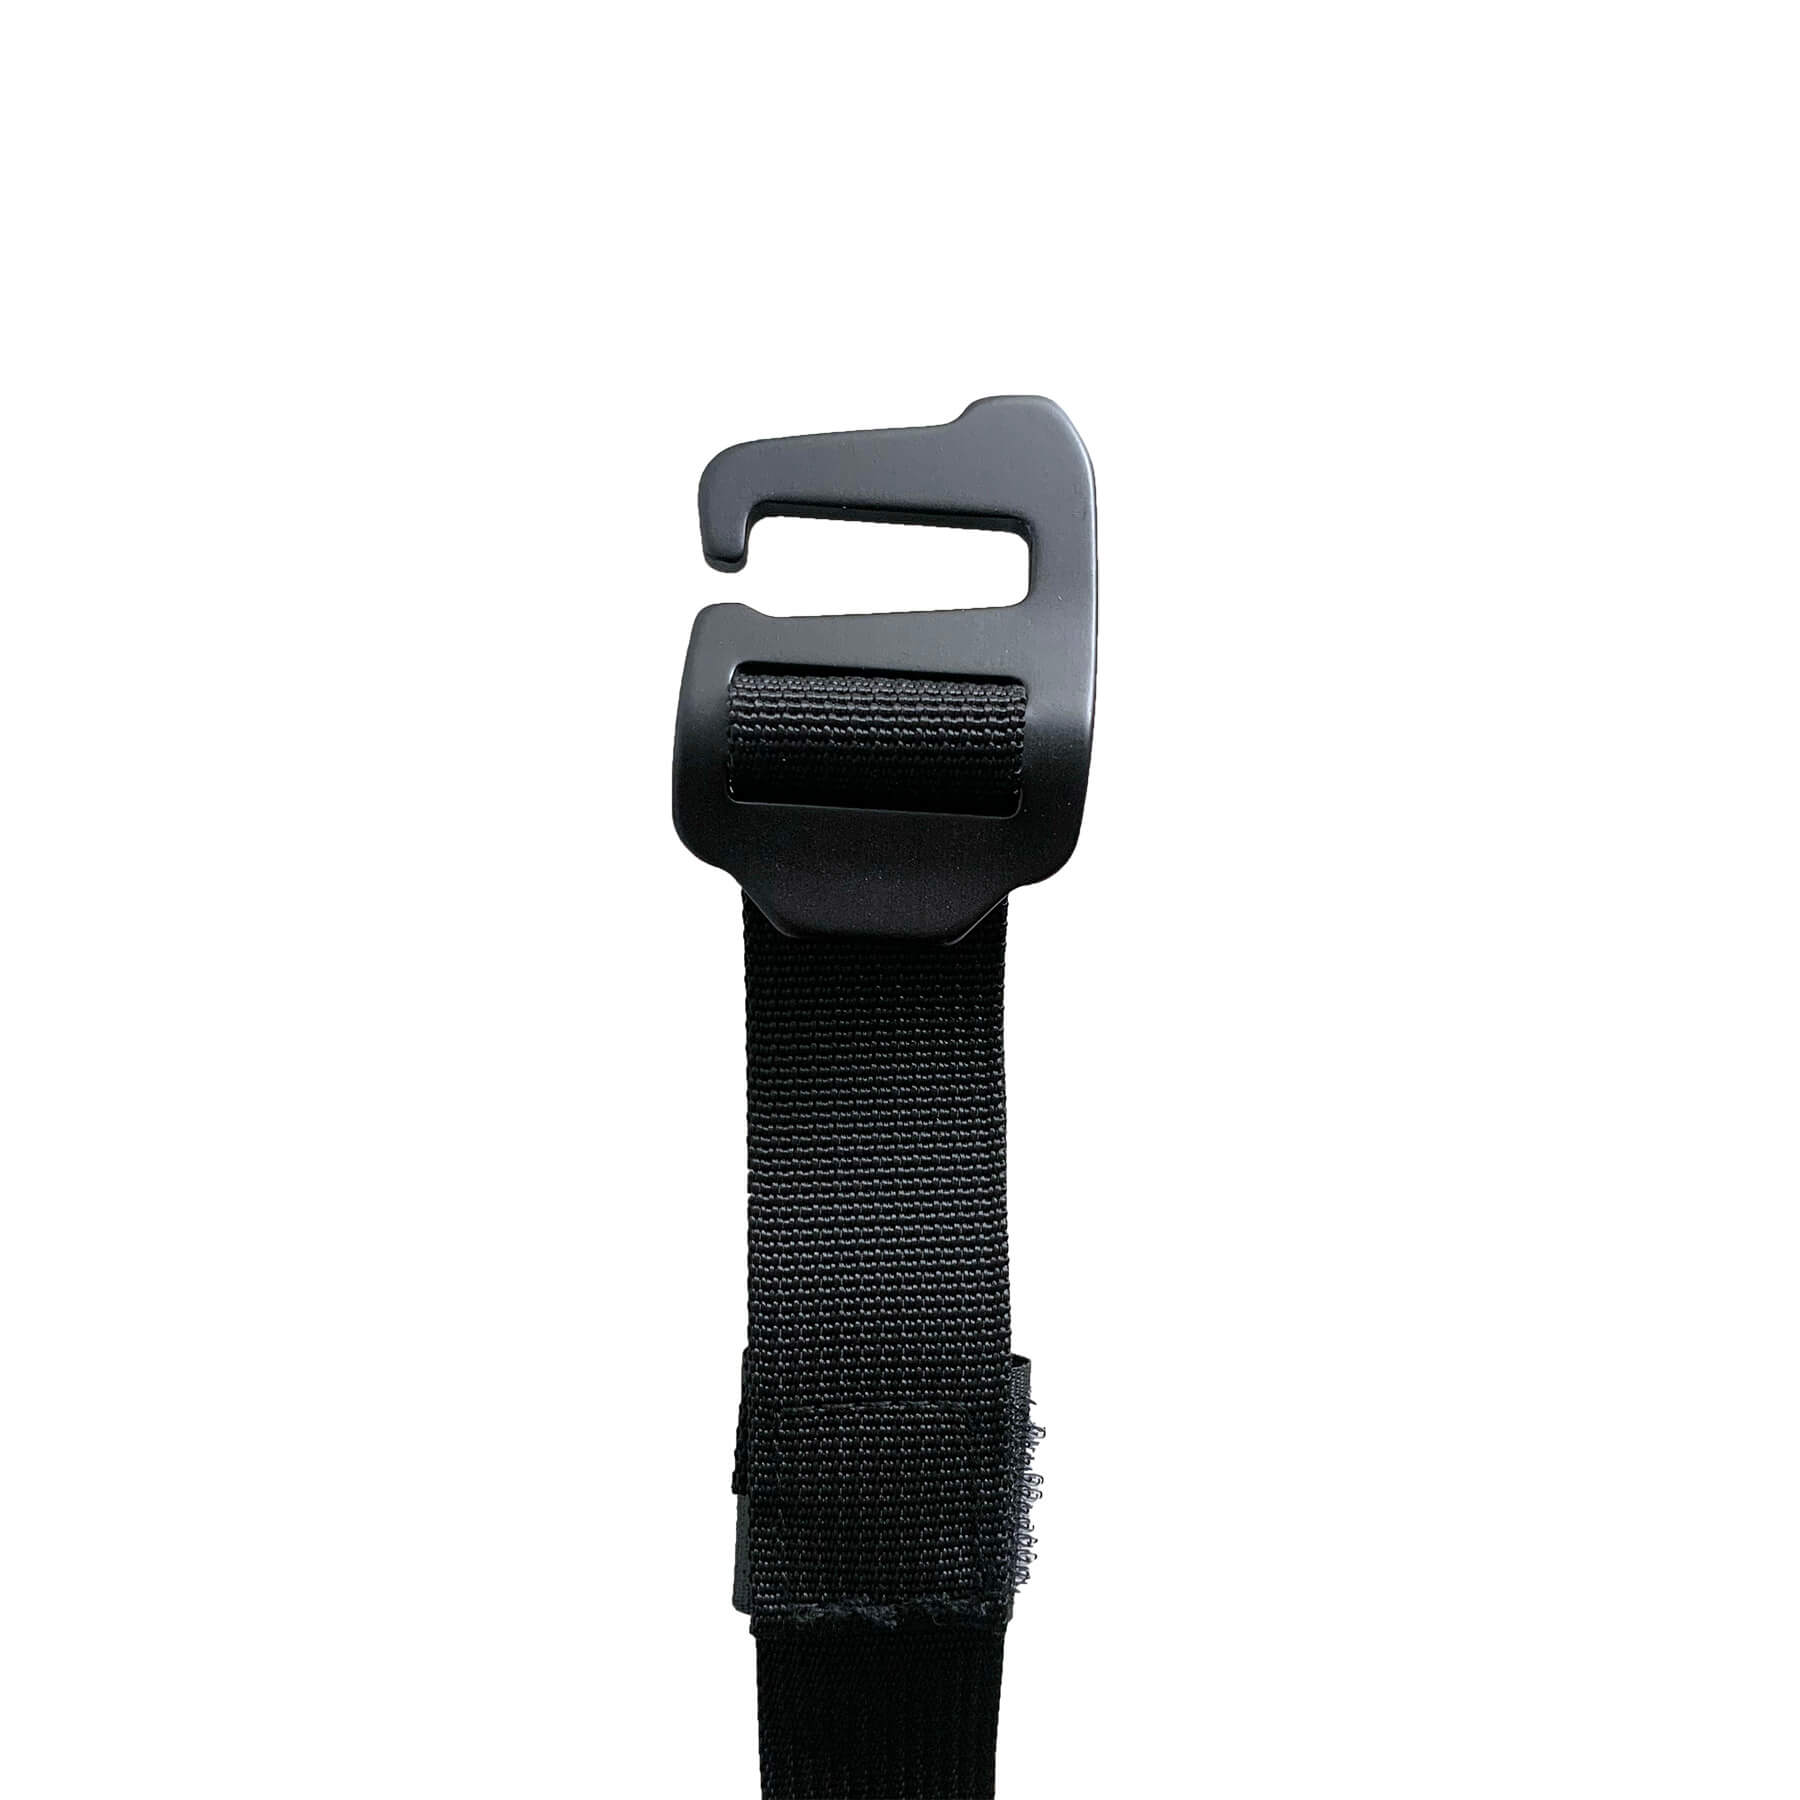 Straps with Clips, Buckles Nylon Webbing Belt Snap Hook Straps for